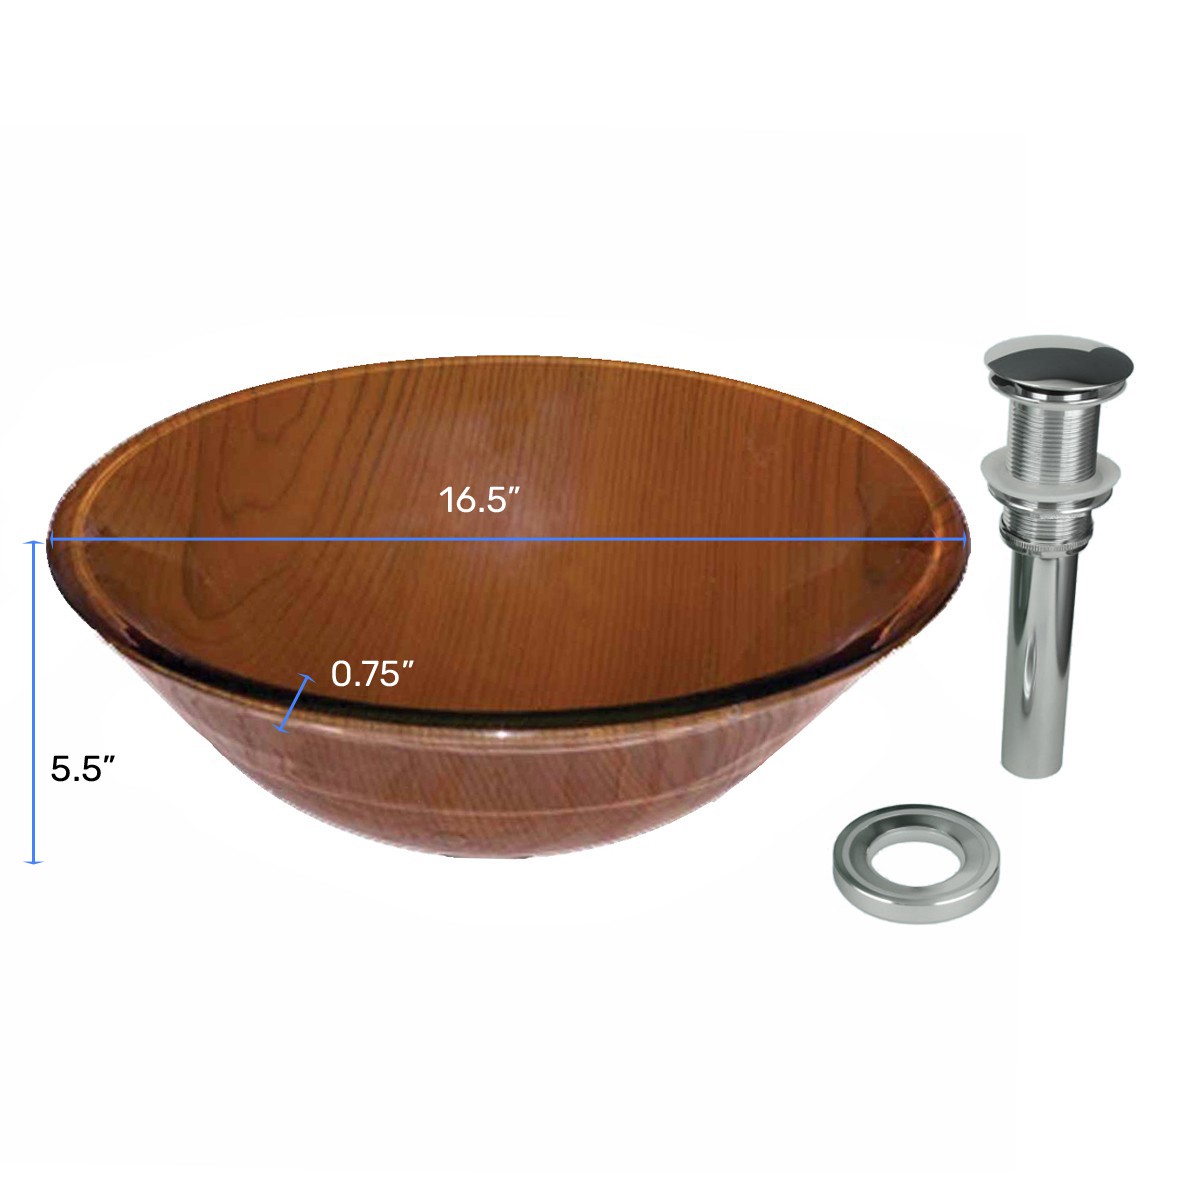 Renovators Supply Tempered Glass Vessel Sink with Drain, Wood Grain Hat Shaped Bowl Sink